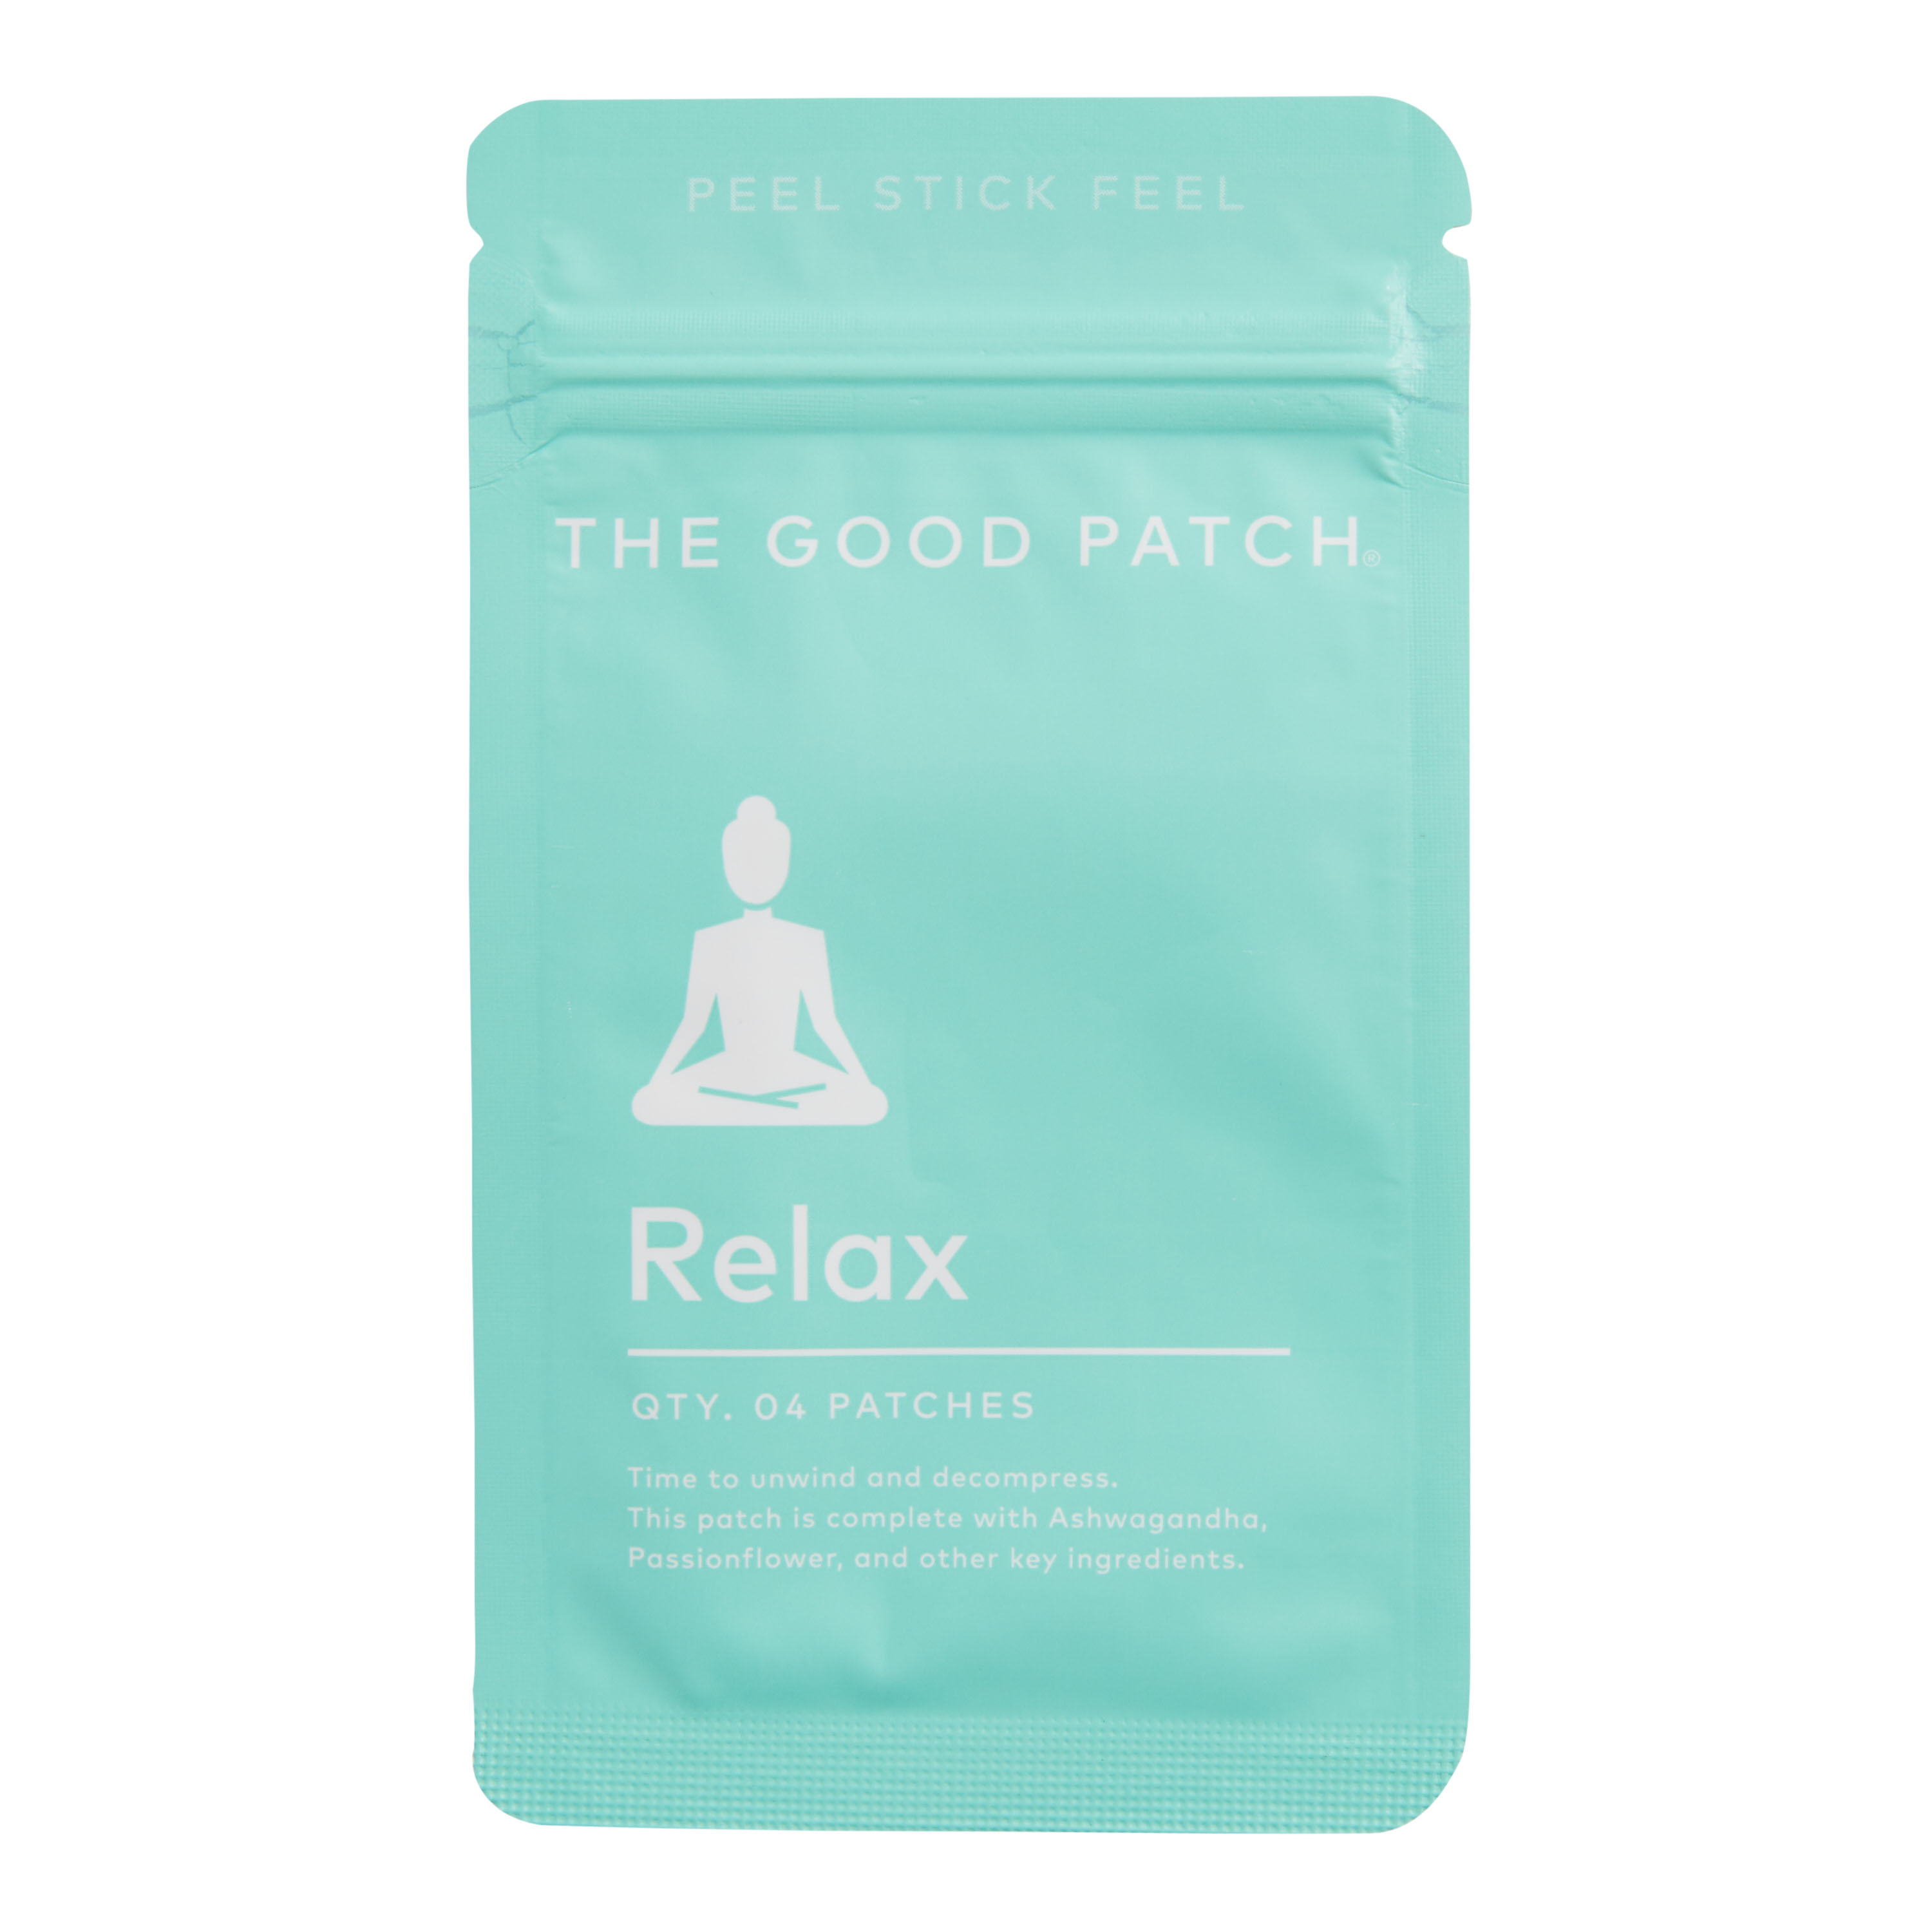 The Good Patch Relax Wellness Patches 4 Count - World Market